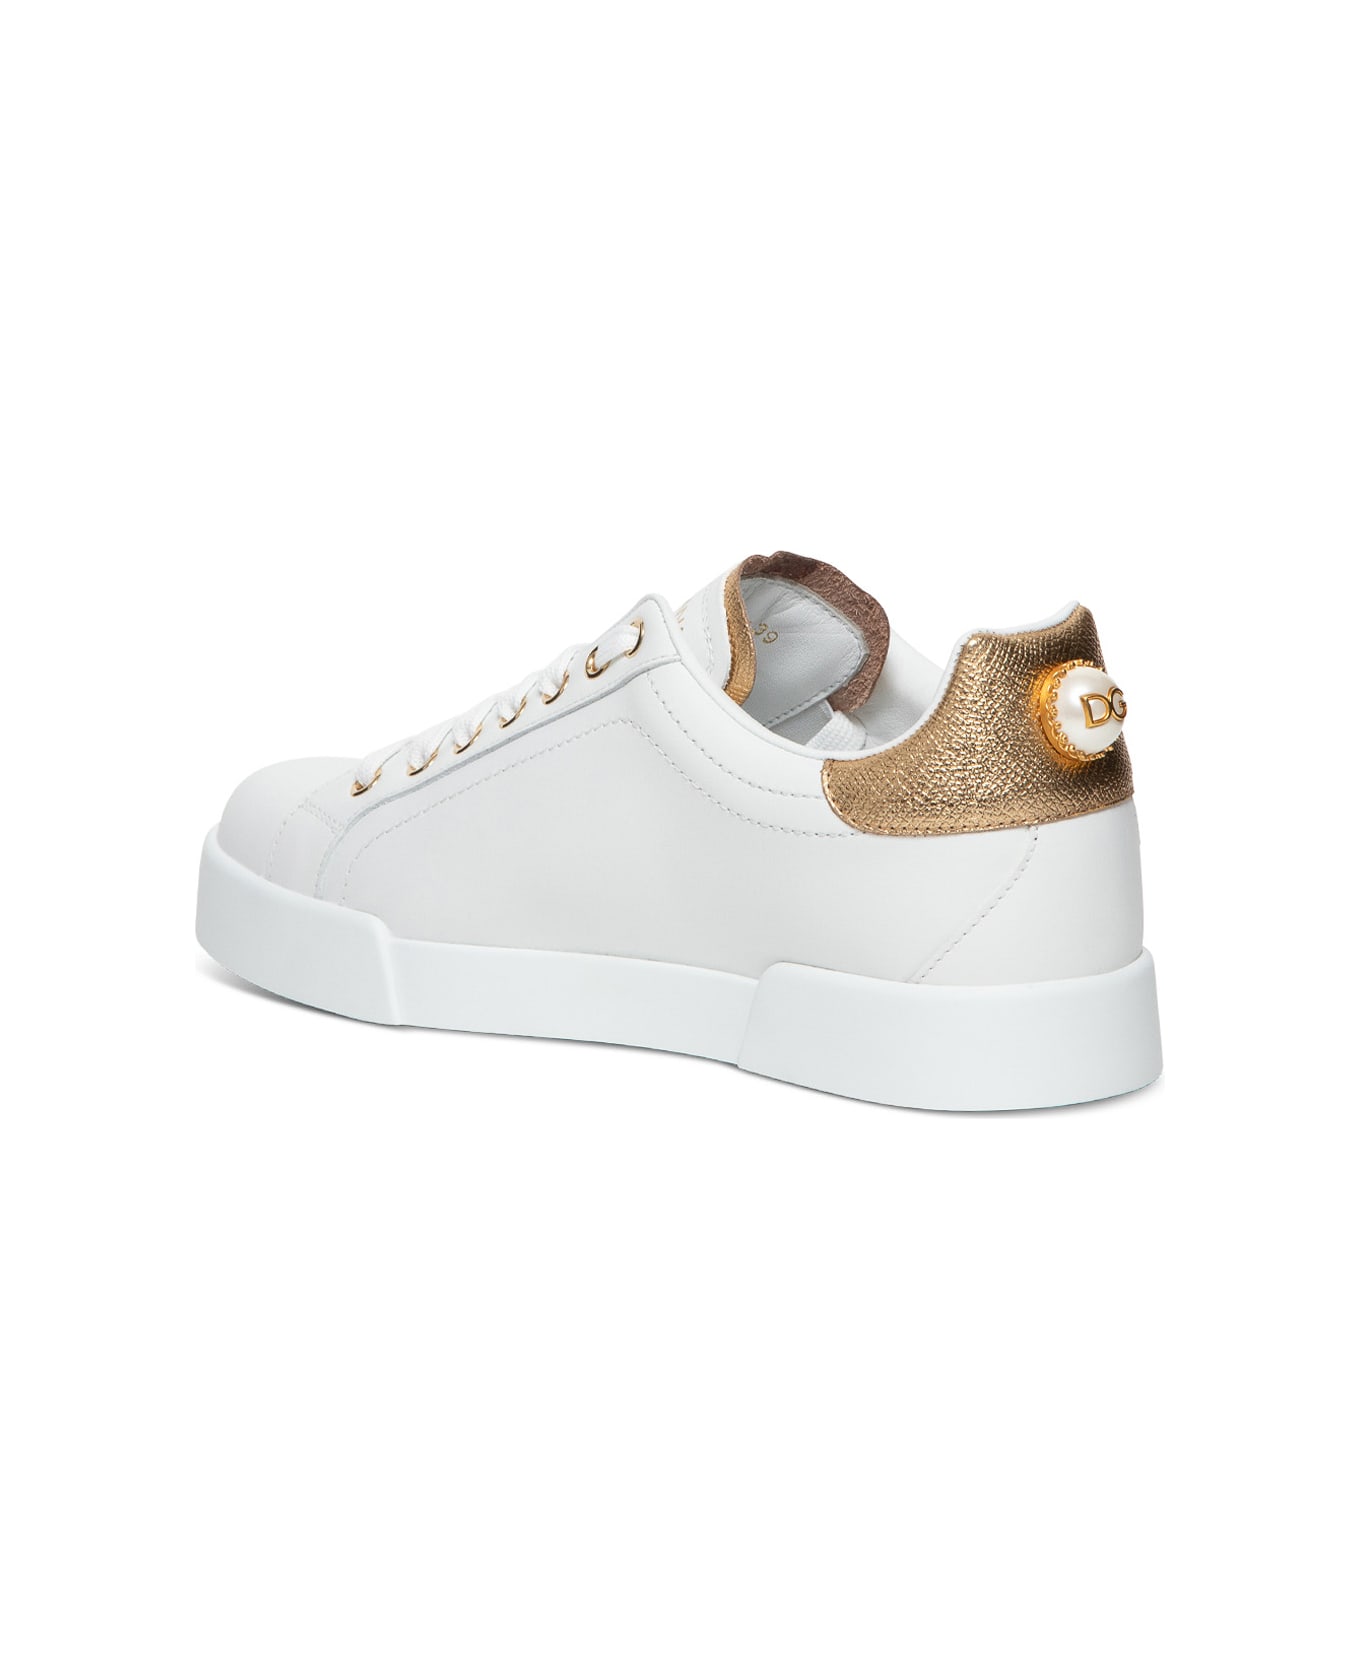 Dolce & Gabbana Leather Sneakers With Gold Colored Details - White